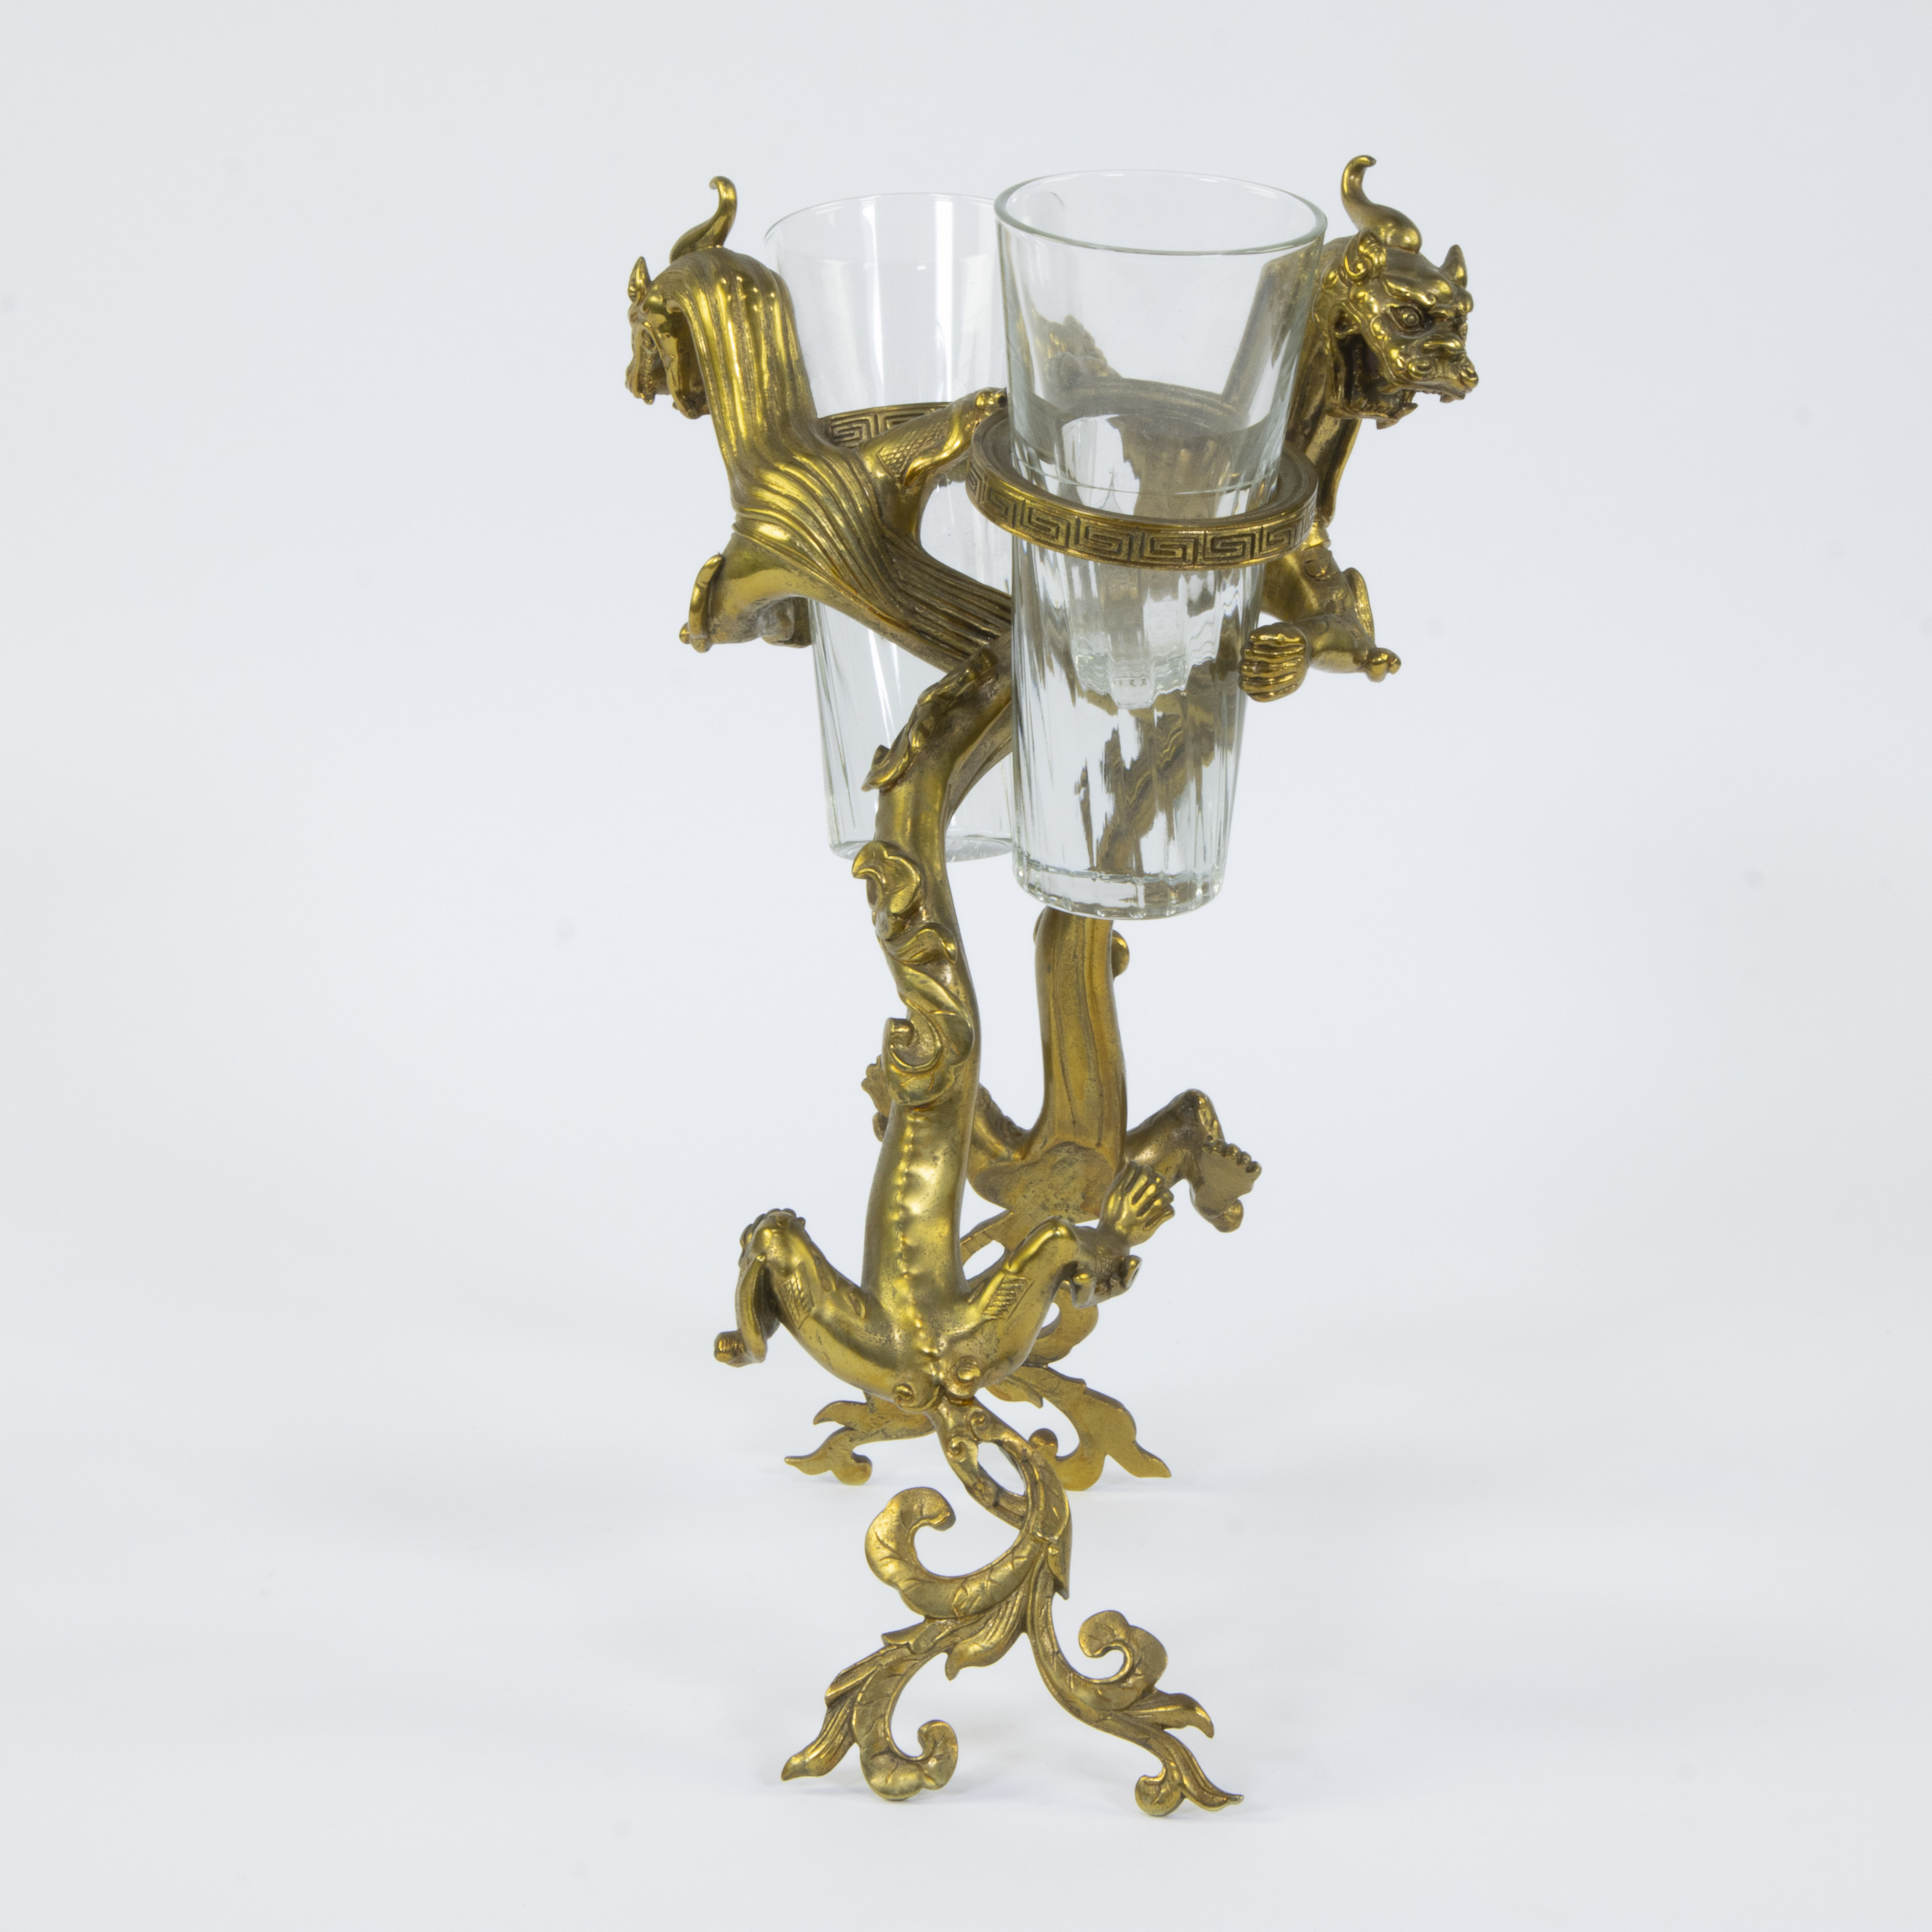 A 'twin' glass holder in gilt bronze in the shape of 2 dragons, circa 1900 - Image 2 of 4